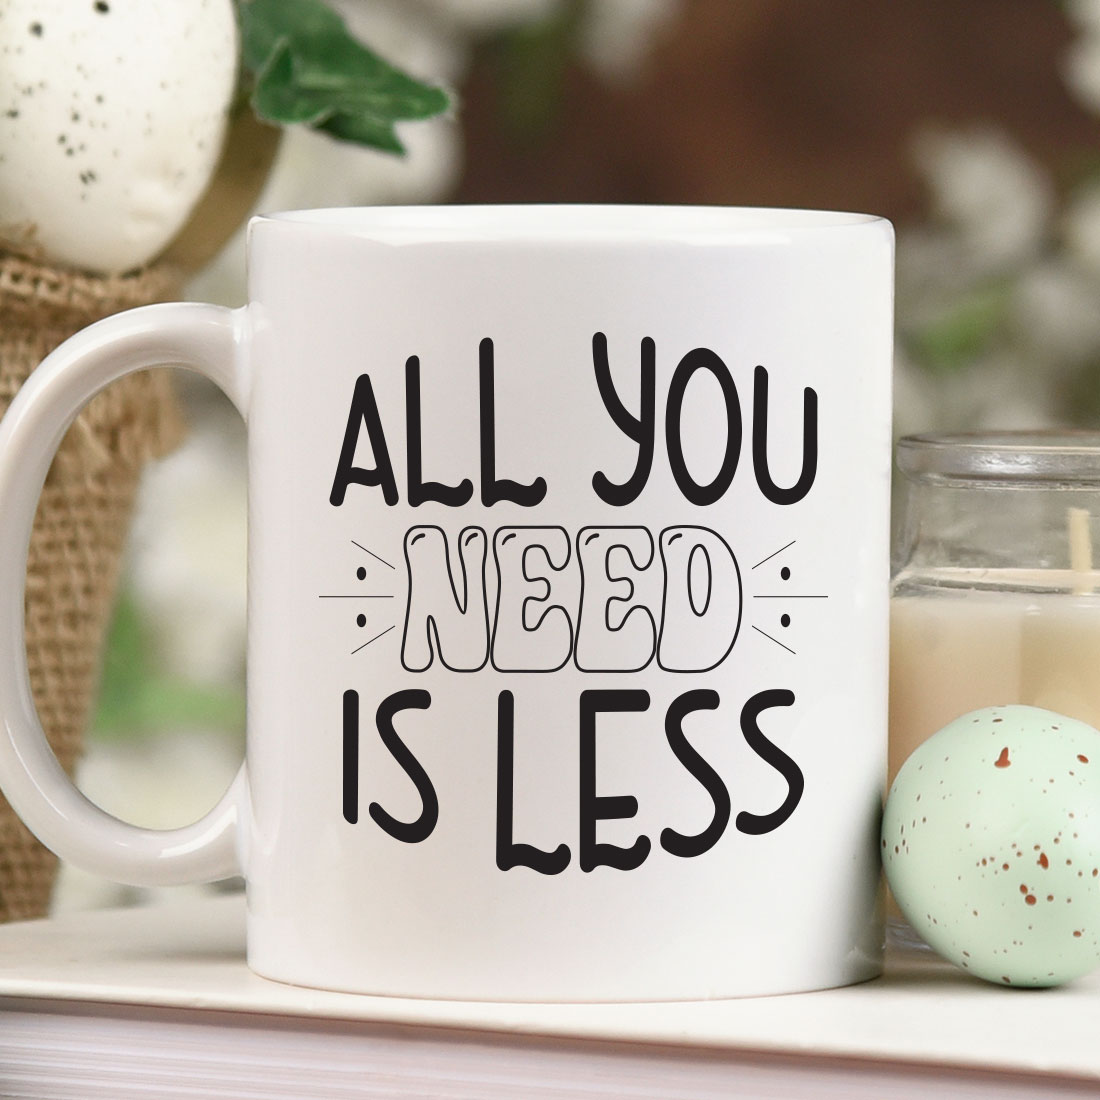 Coffee mug that says all you need is less next to a candle.